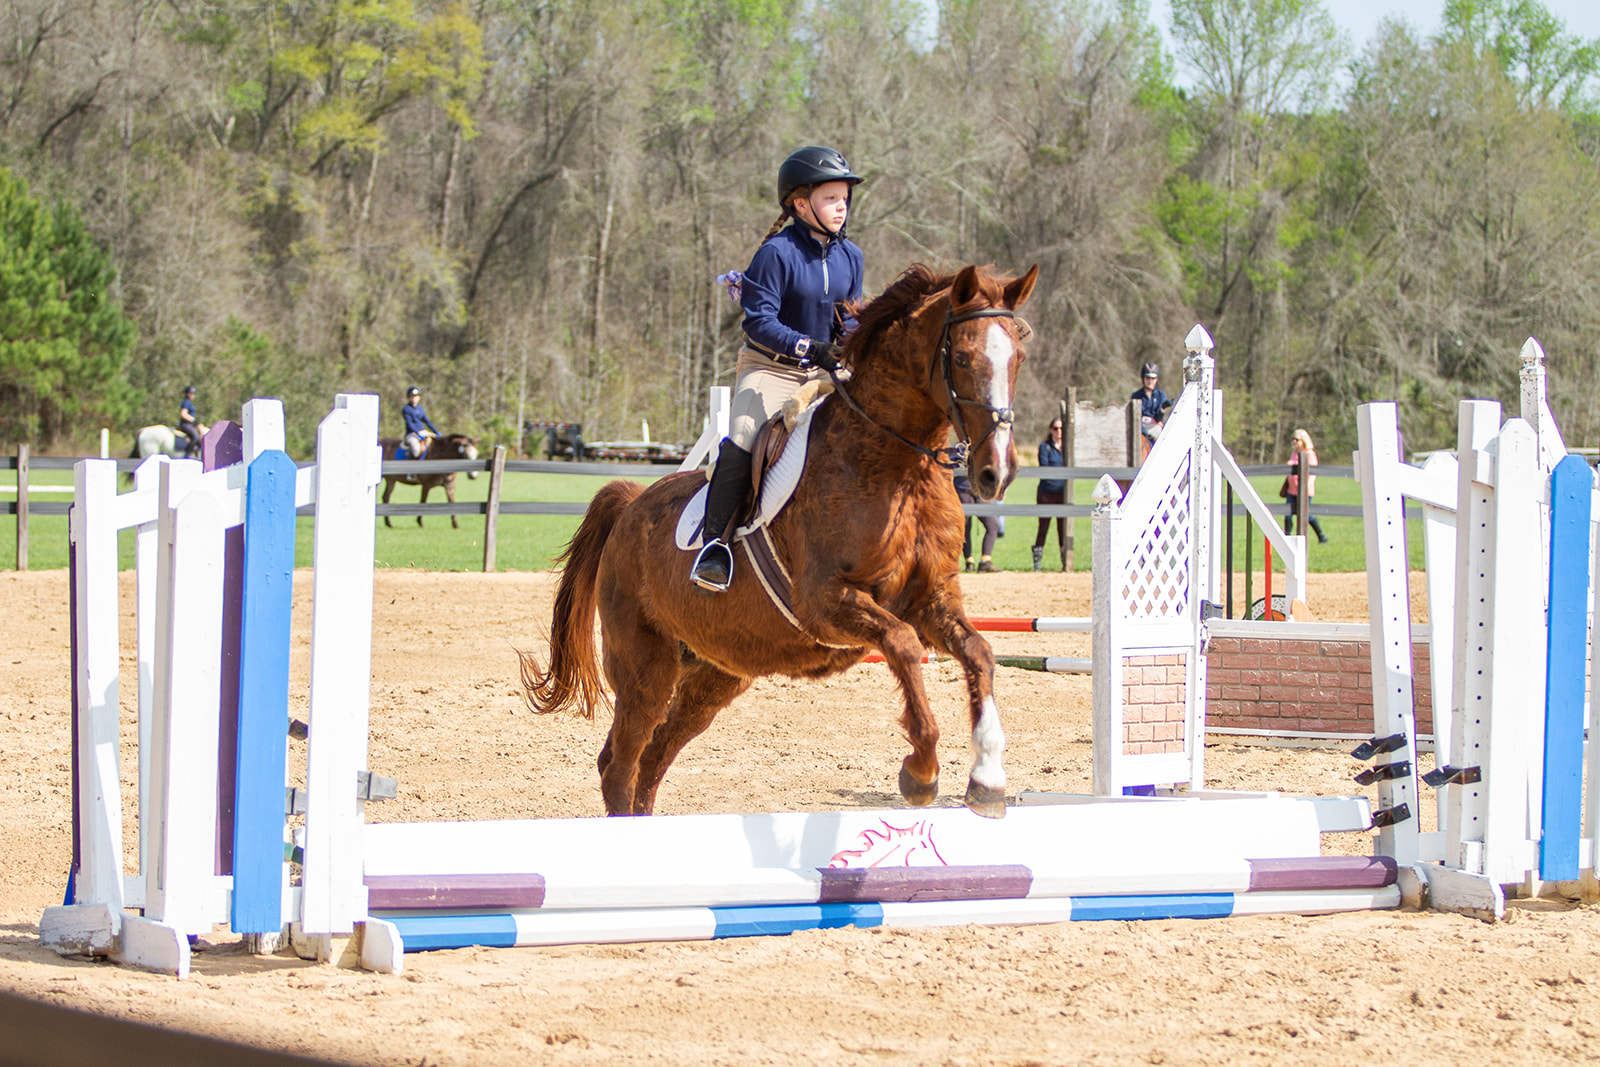 Equestrian competing in Show Jumping during Eventing competition in Tallahassee, FL at Mahan Farm. calicoandchrome.com